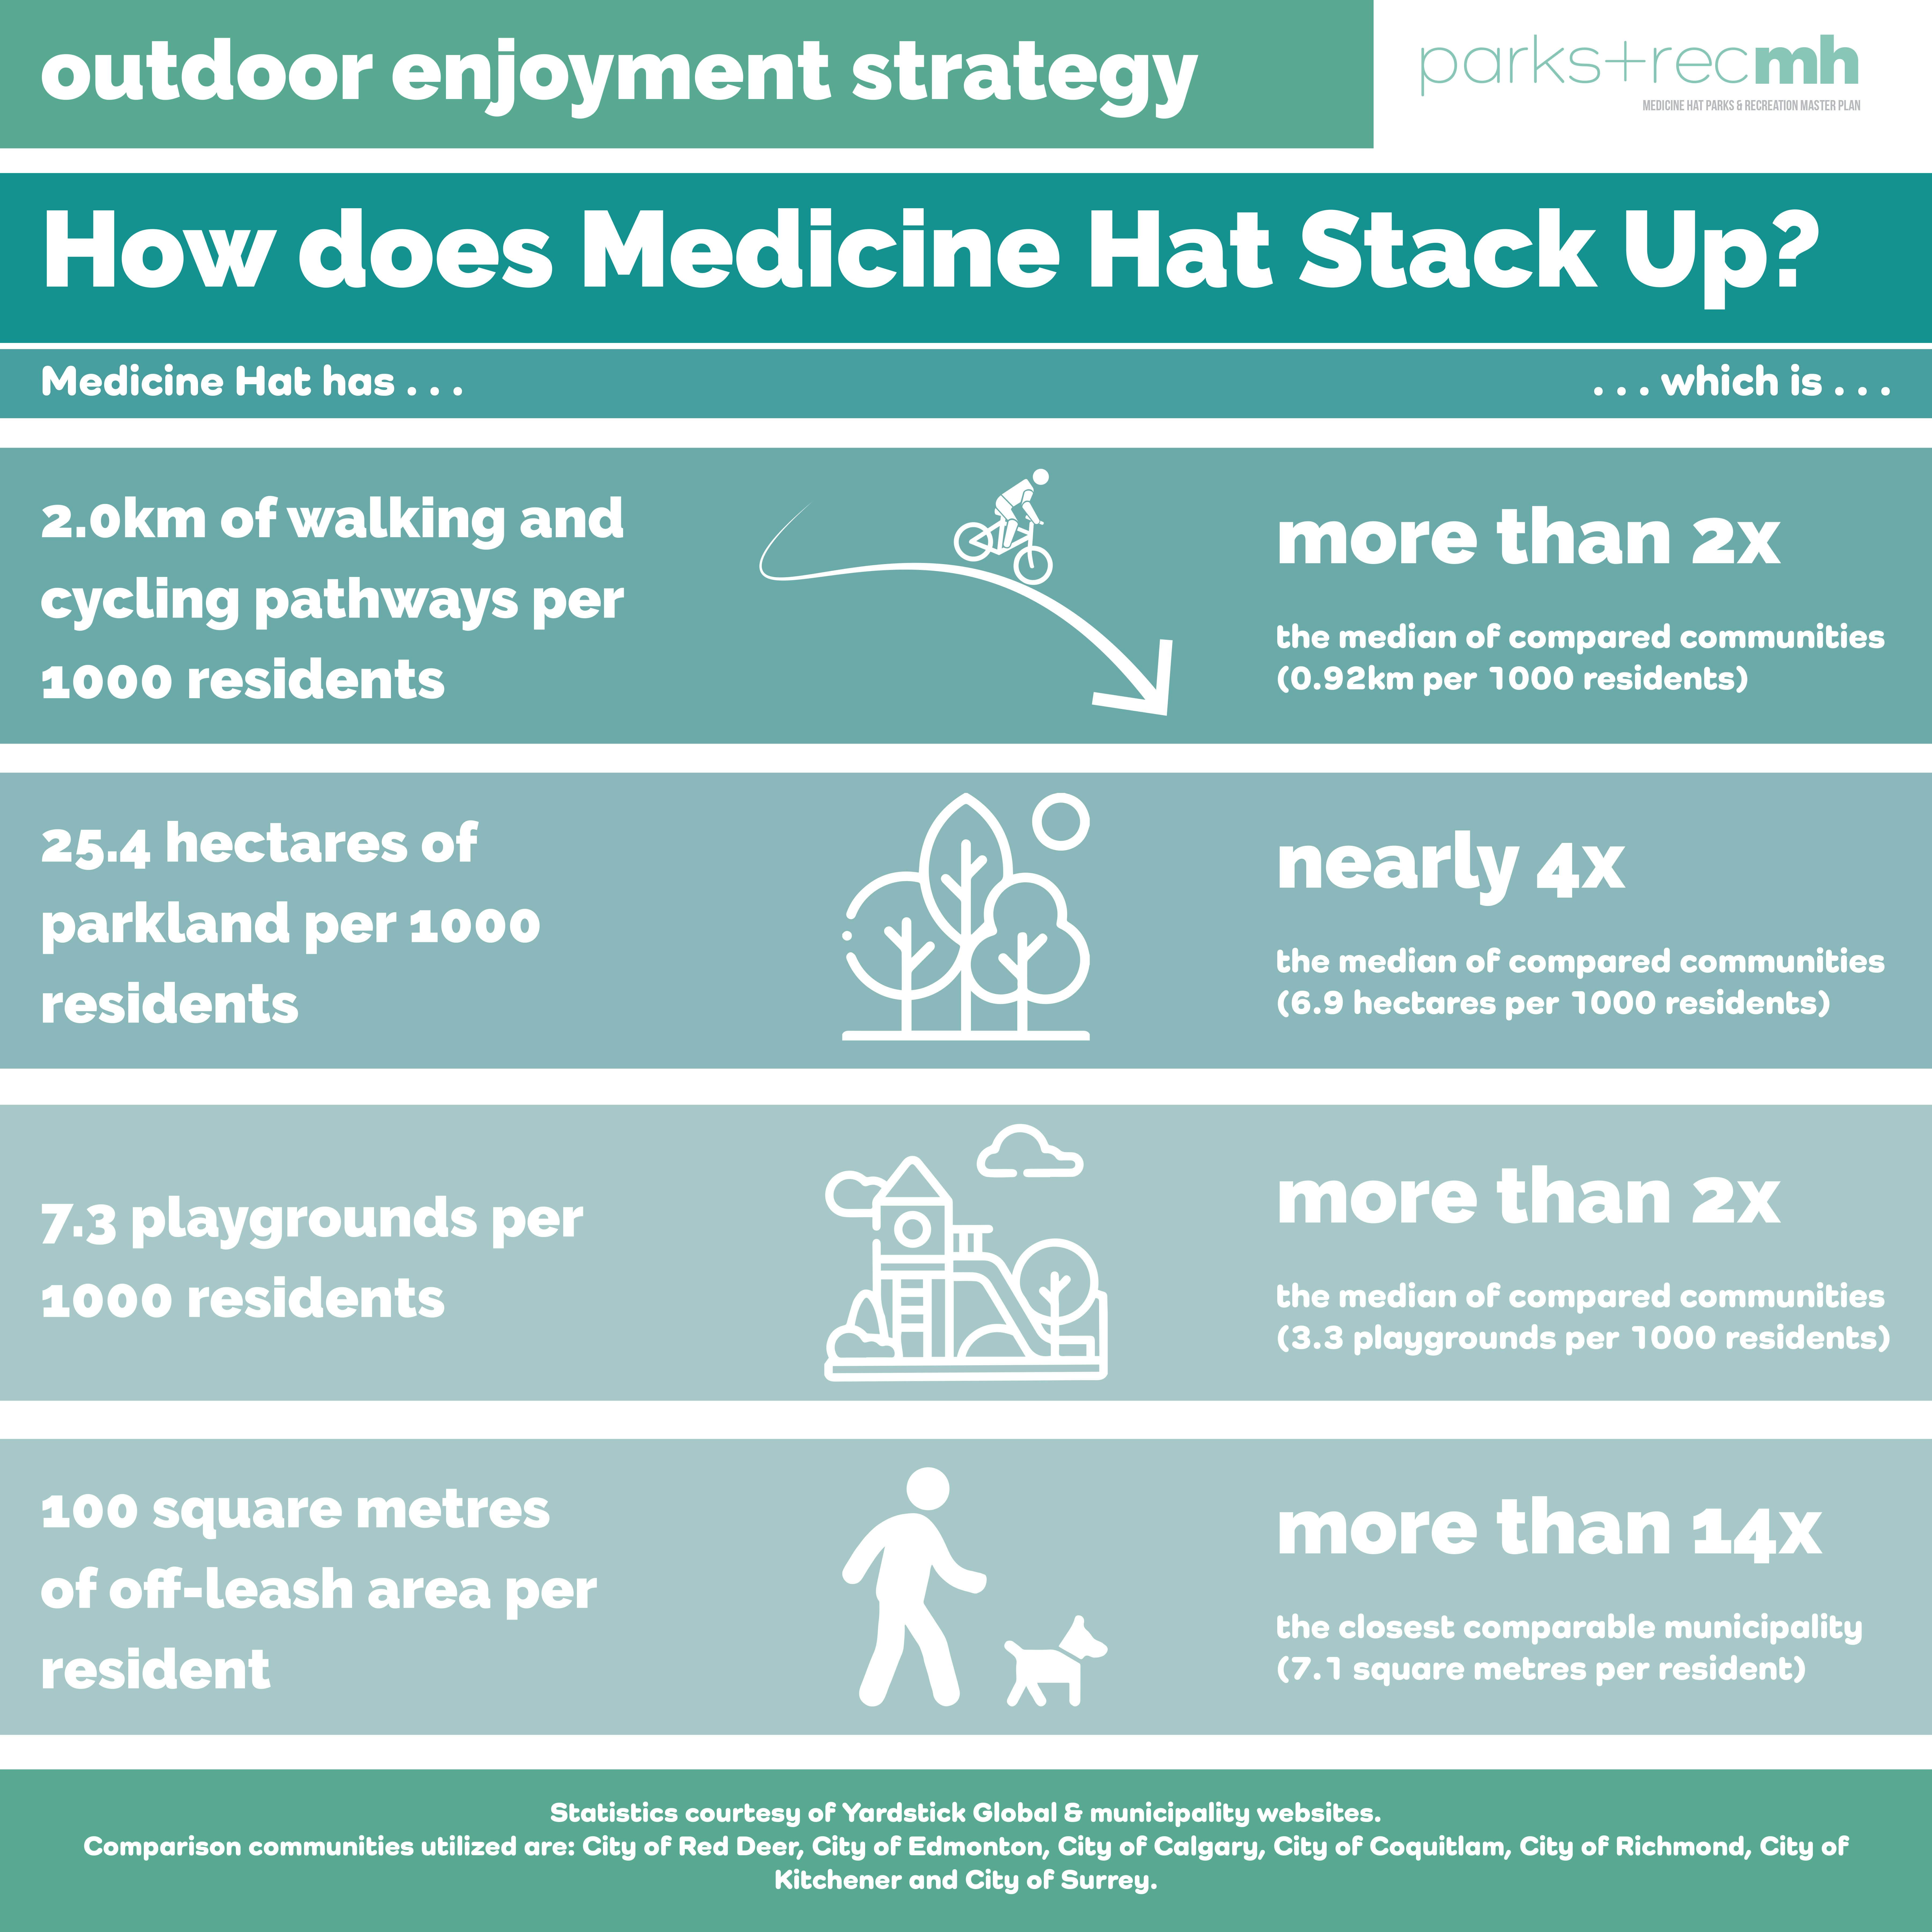 How does Medicine Hat stack up to other communities?